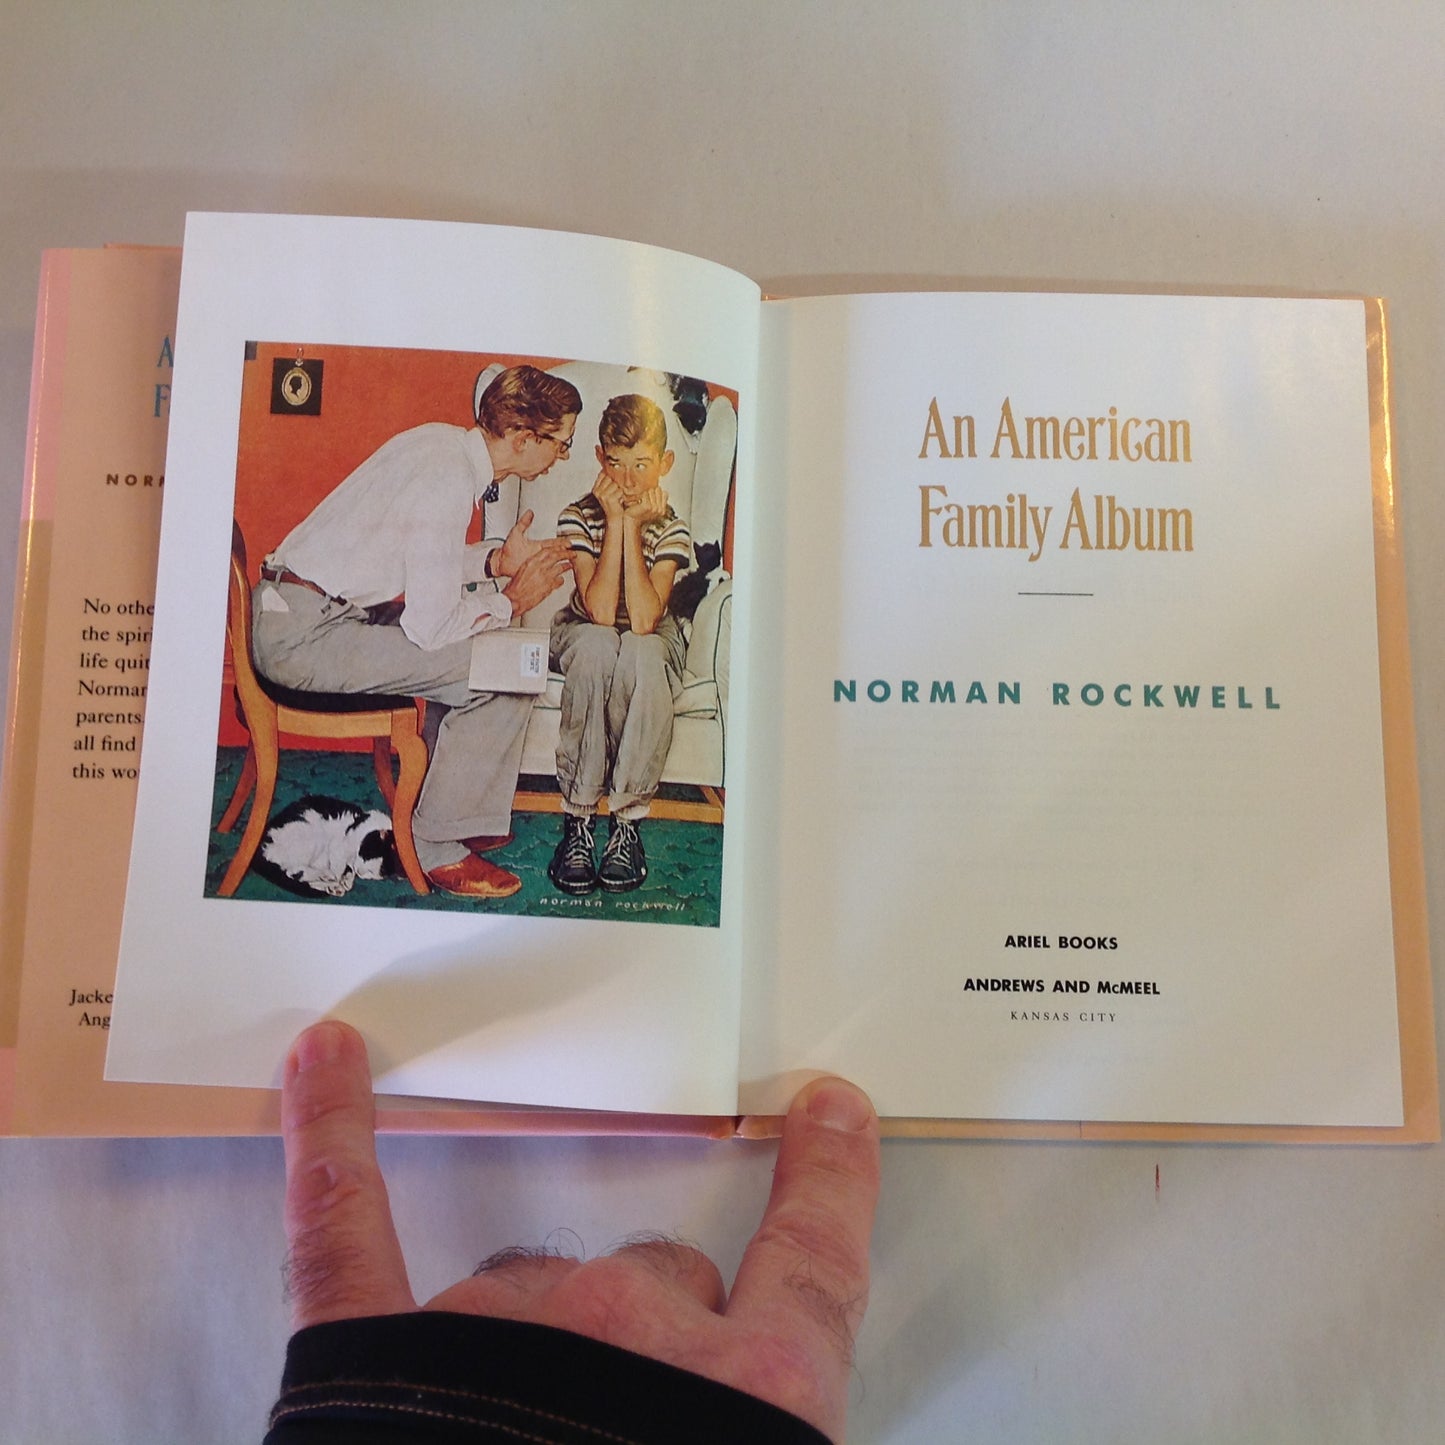 Vintage 1993 Hardcover Gift Book Norman Rockwell: An American Family Album